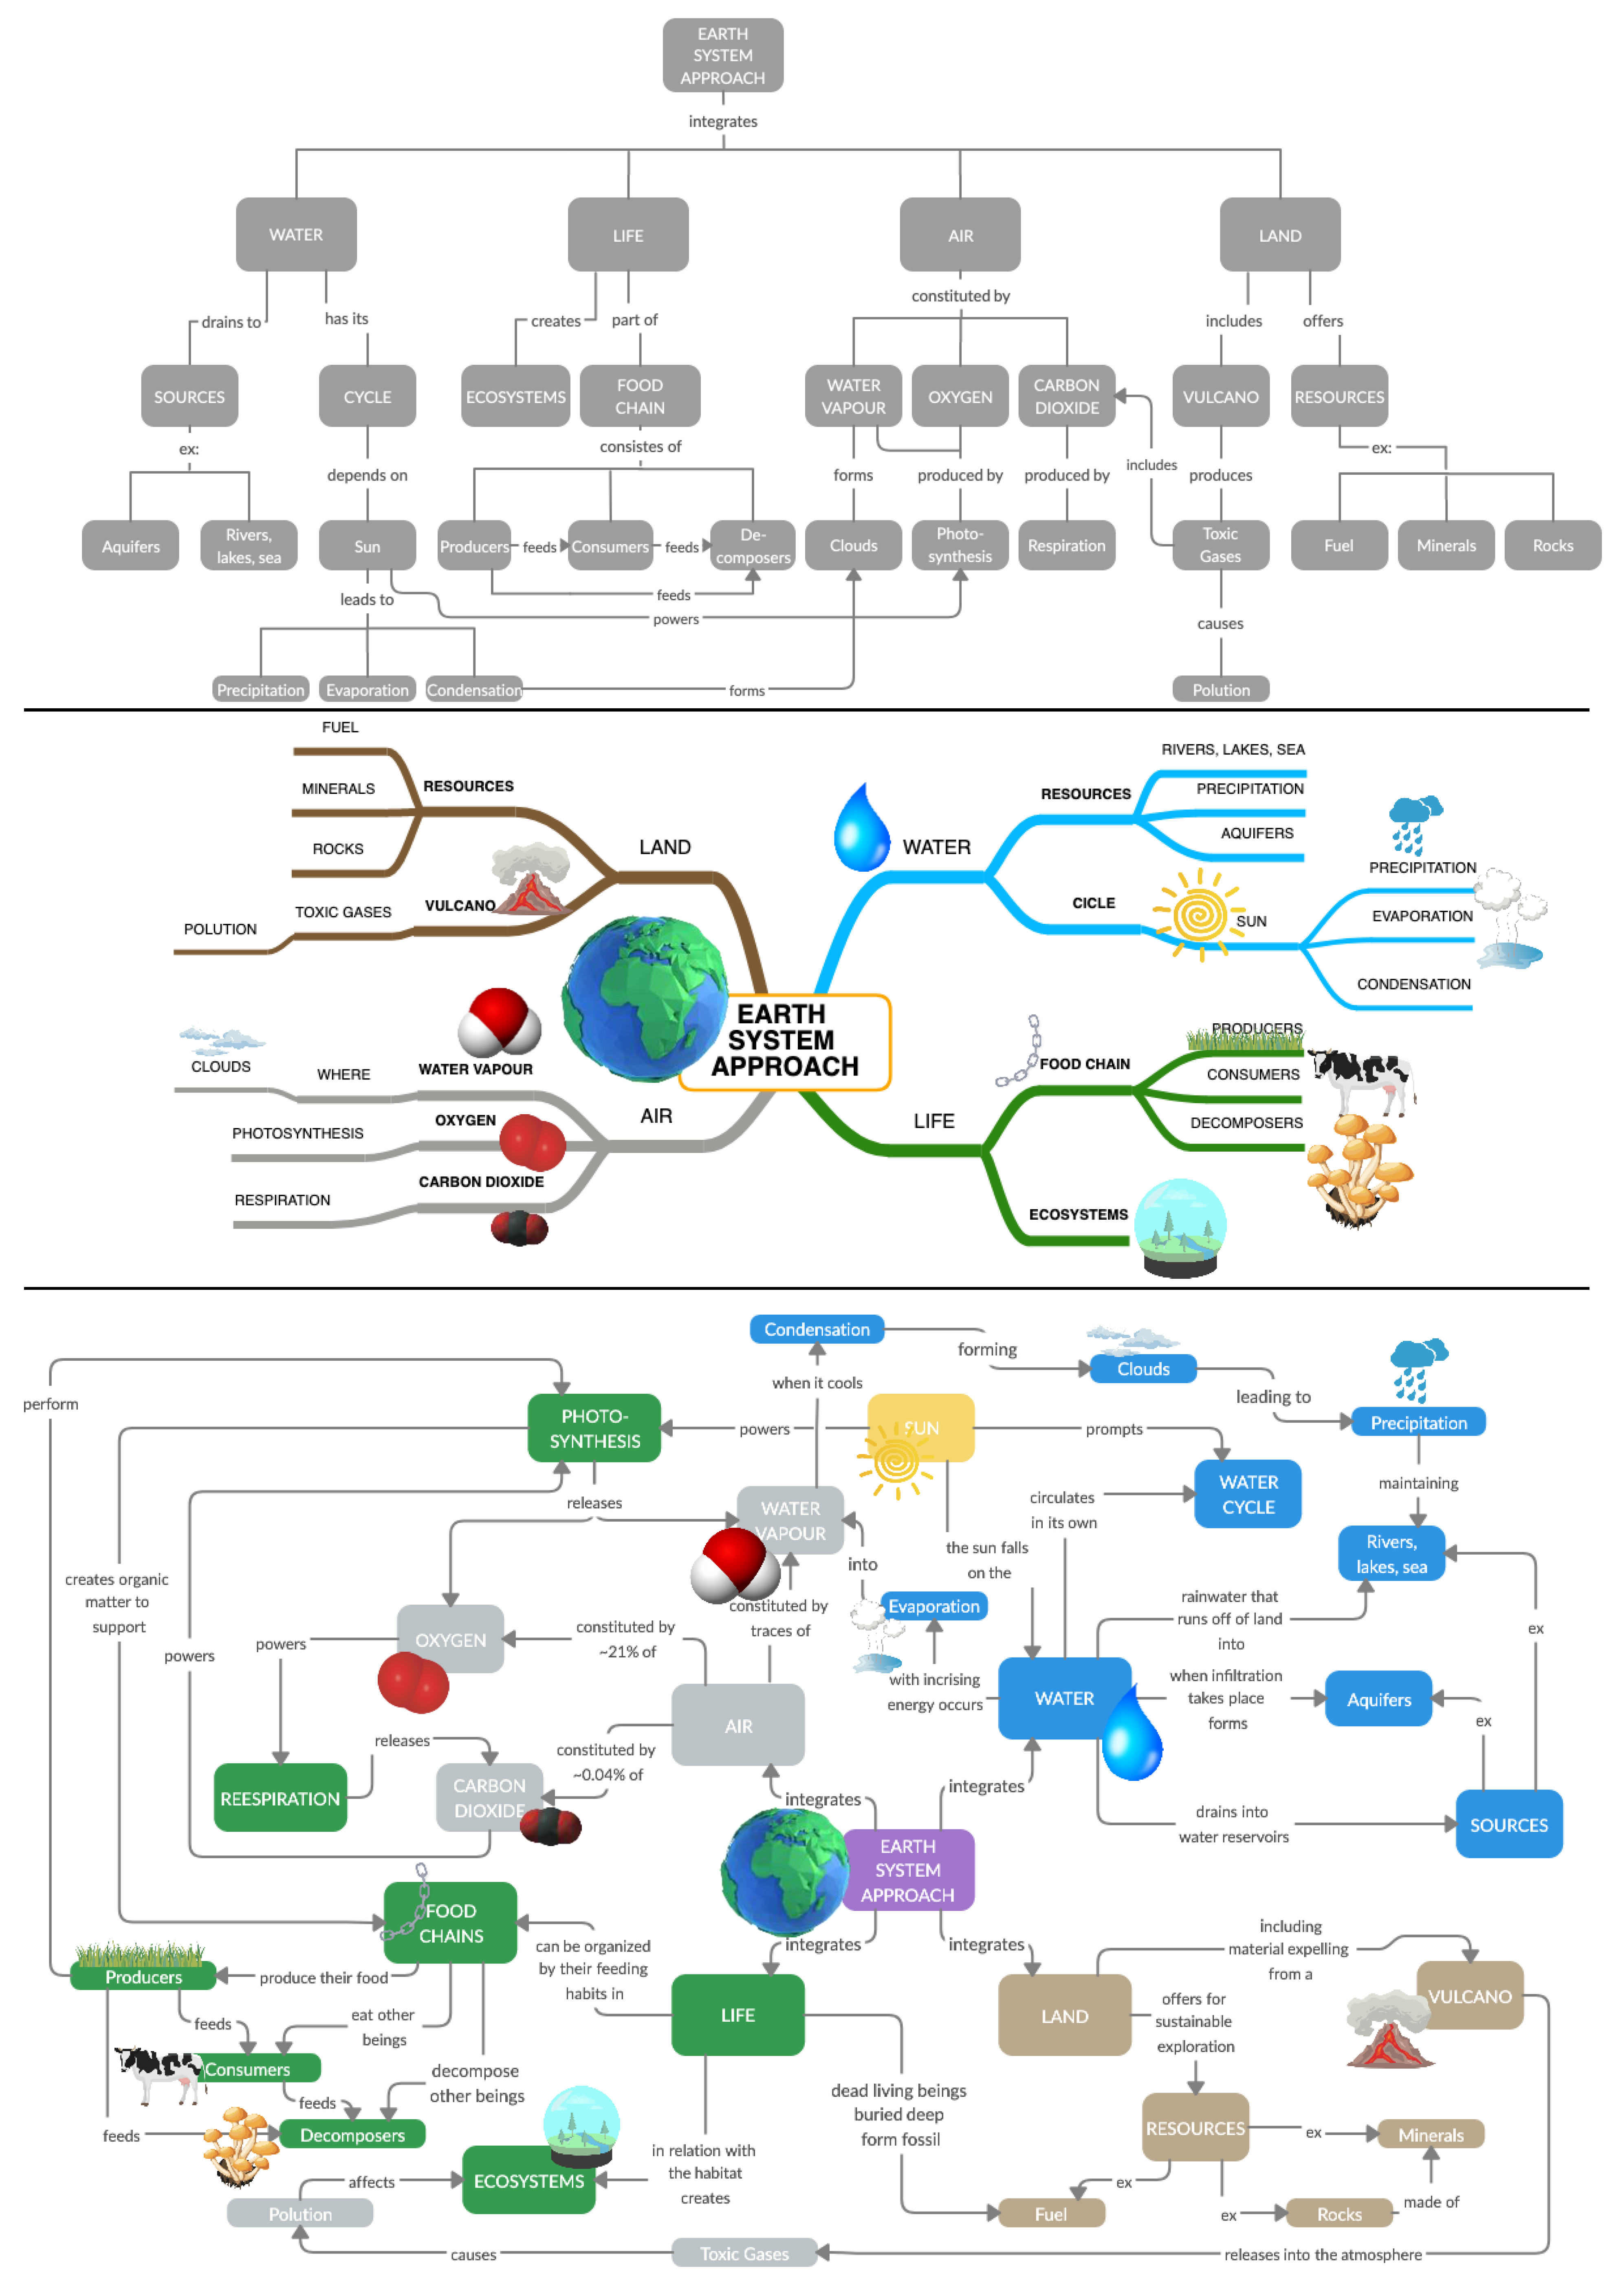 discovery of dna structure concept map